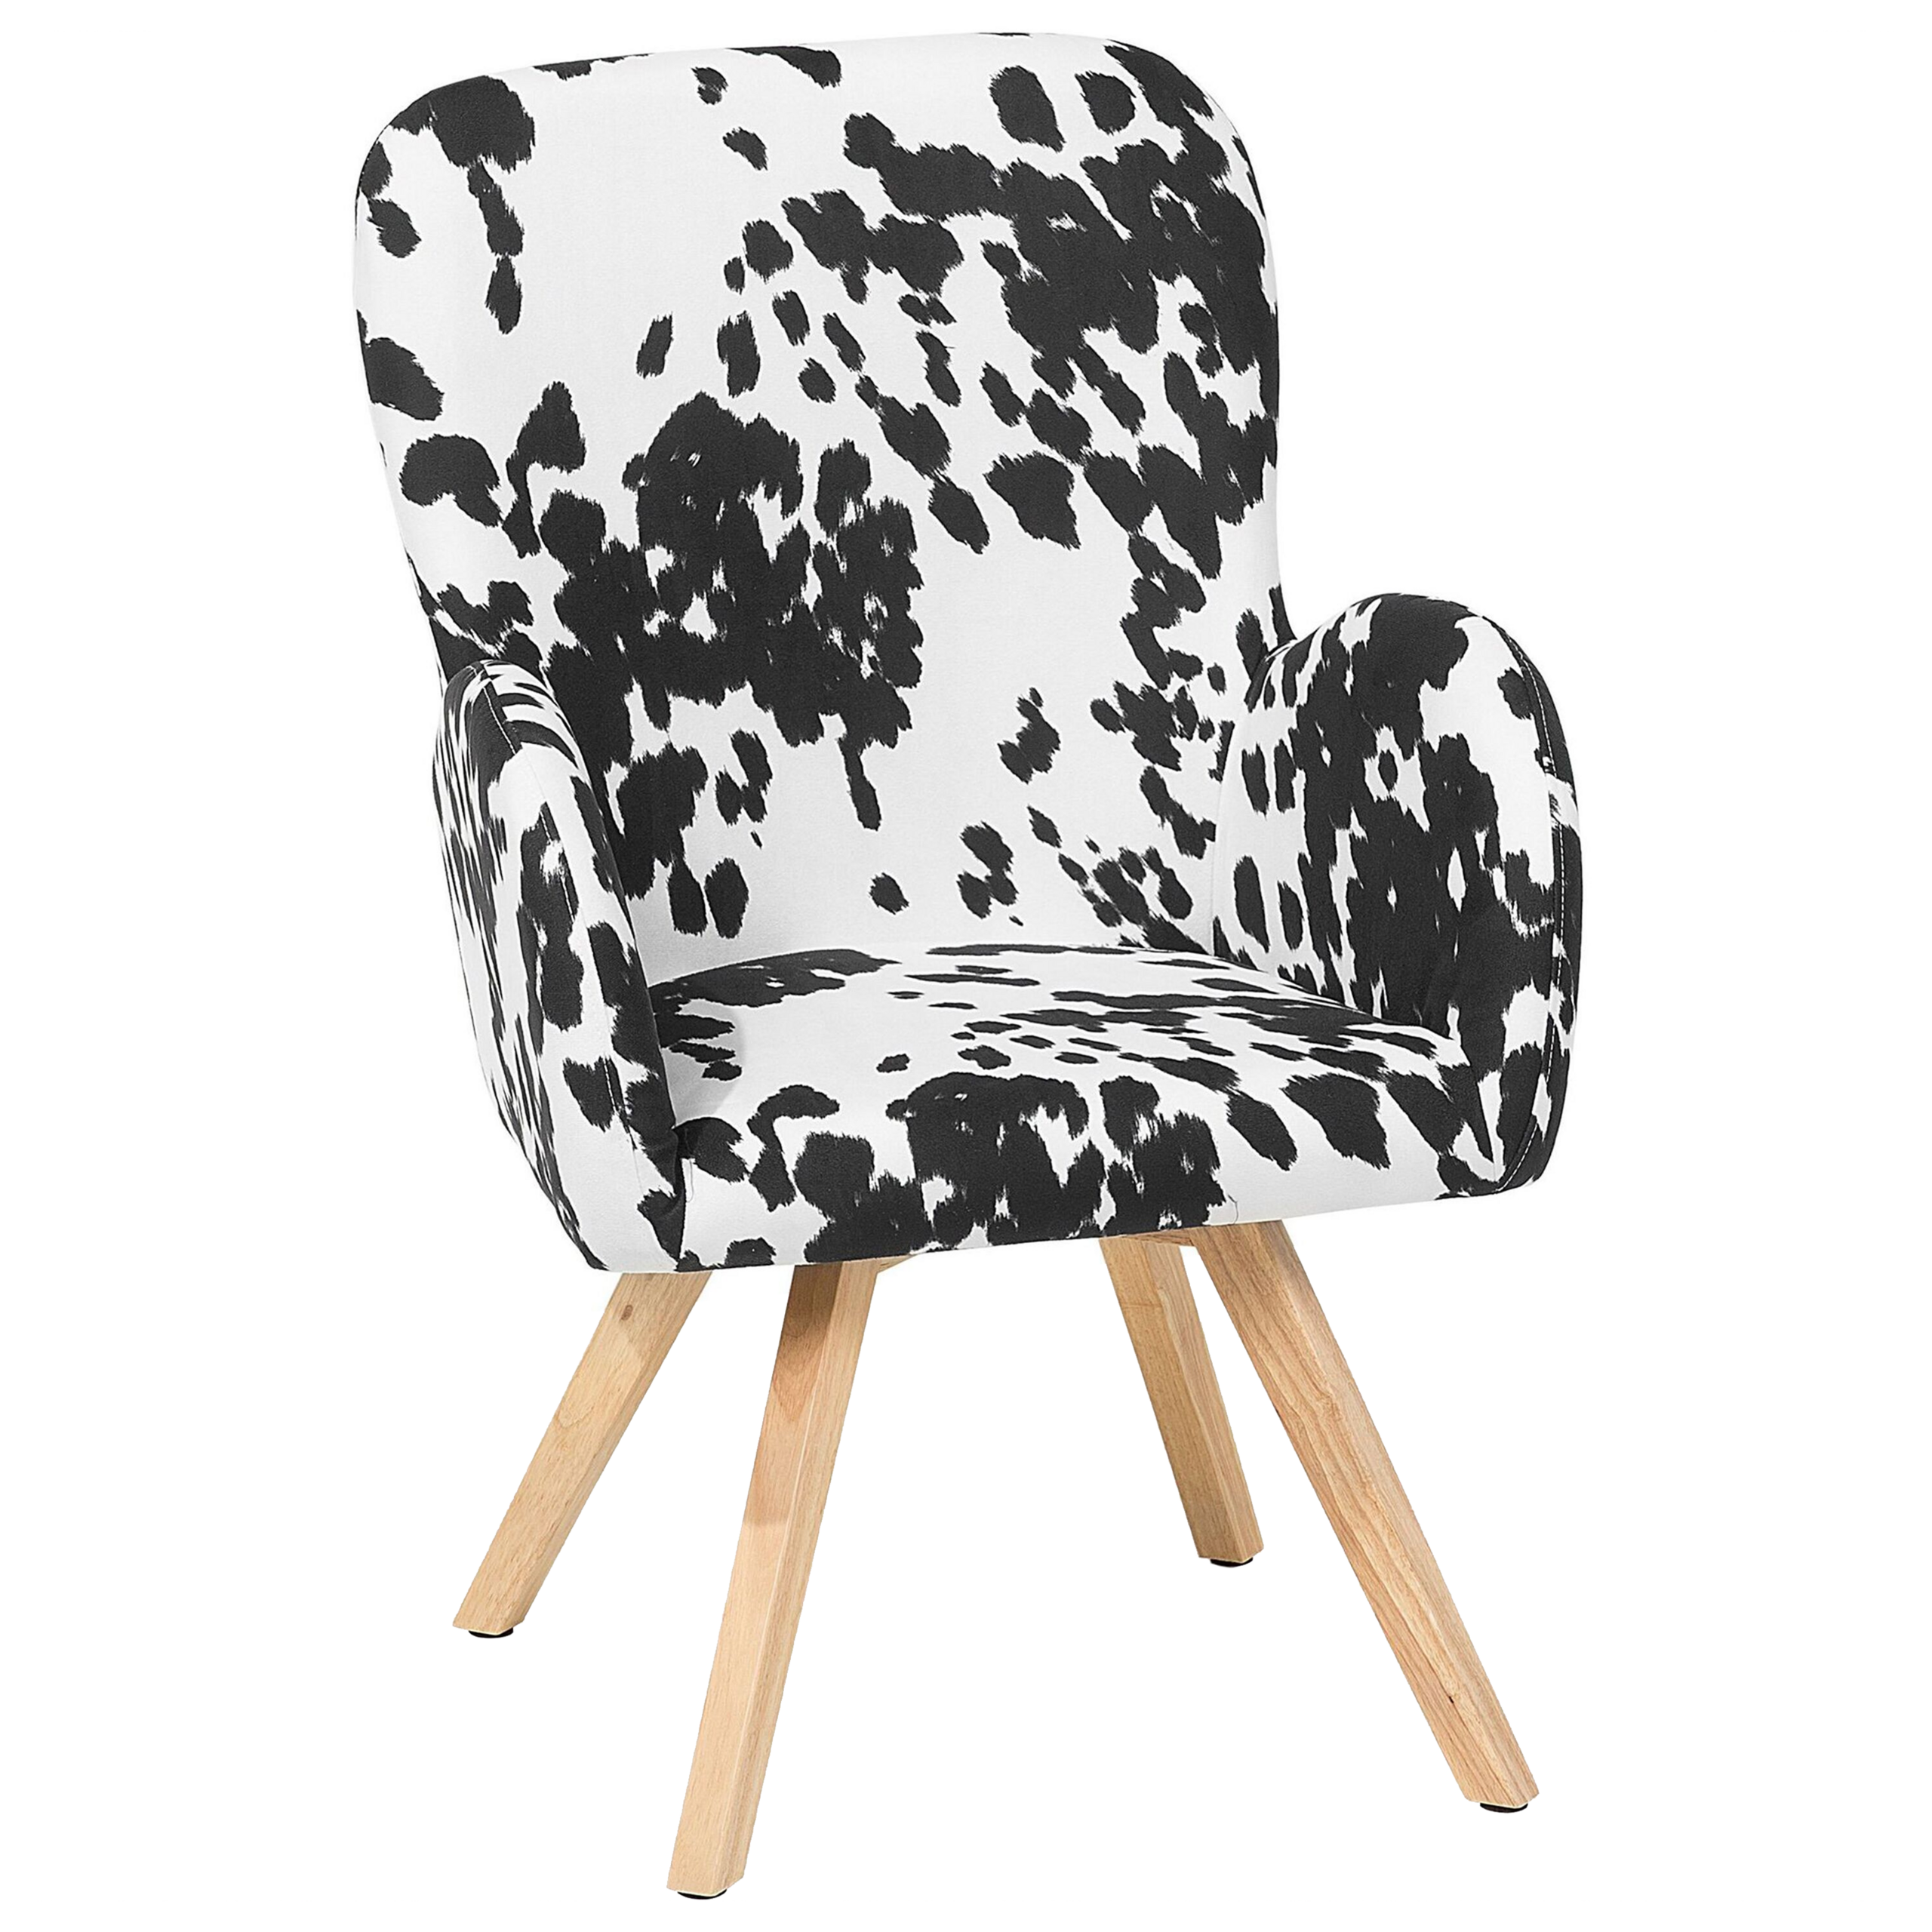 Beliani Lounge Chair Black and White Fabric Upholstery Cow Print Modern Club Chair with Armrests Wooden Legs